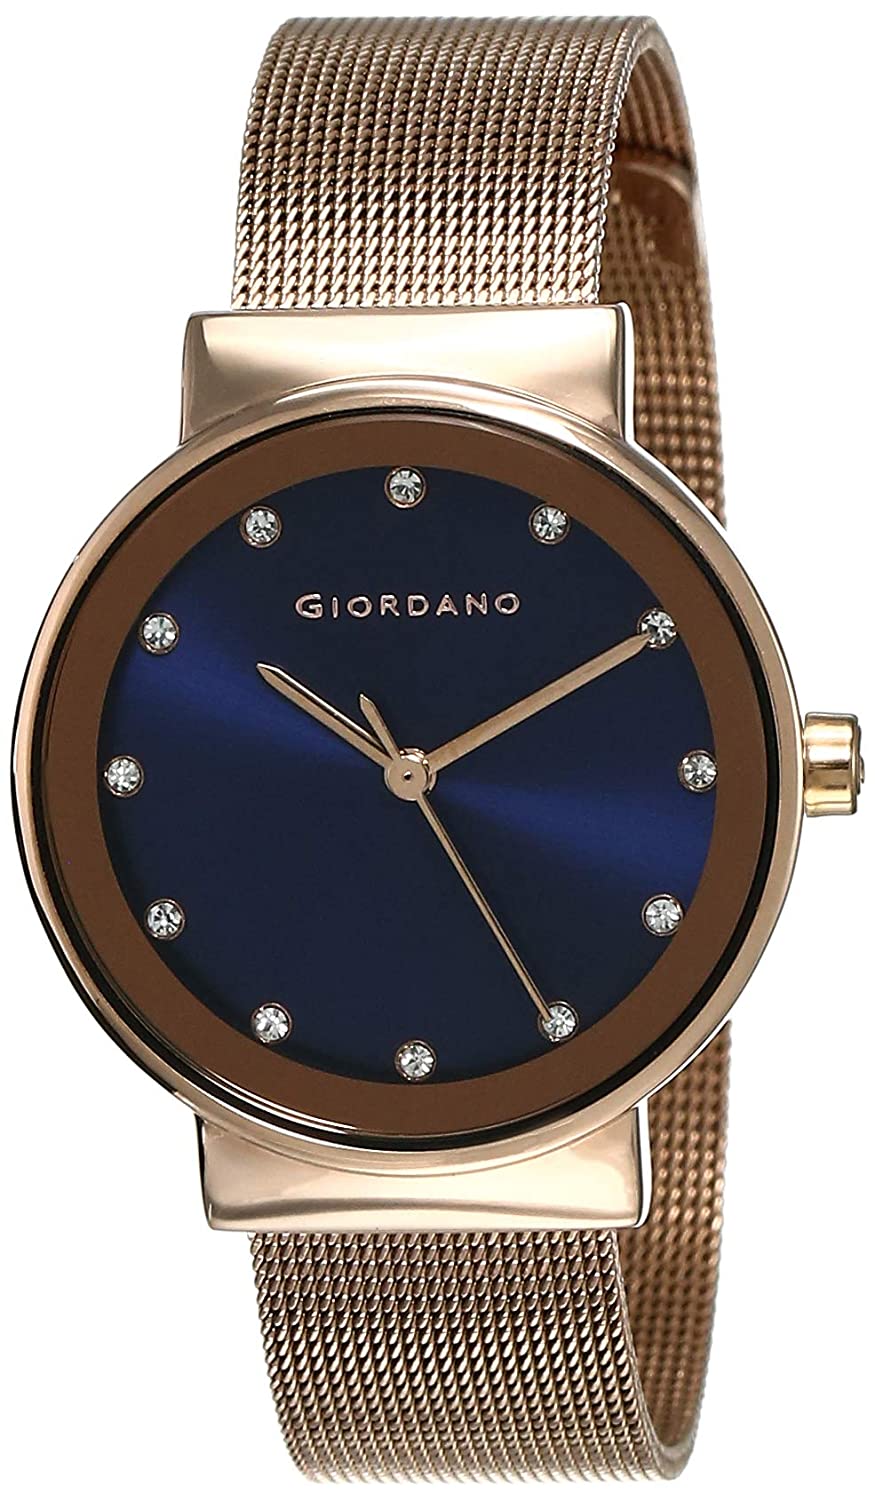 Giordano Women's Latest Fashion Blue Dial Rose Gold Mesh Band Watch, Model No. A2047-44 Price in India